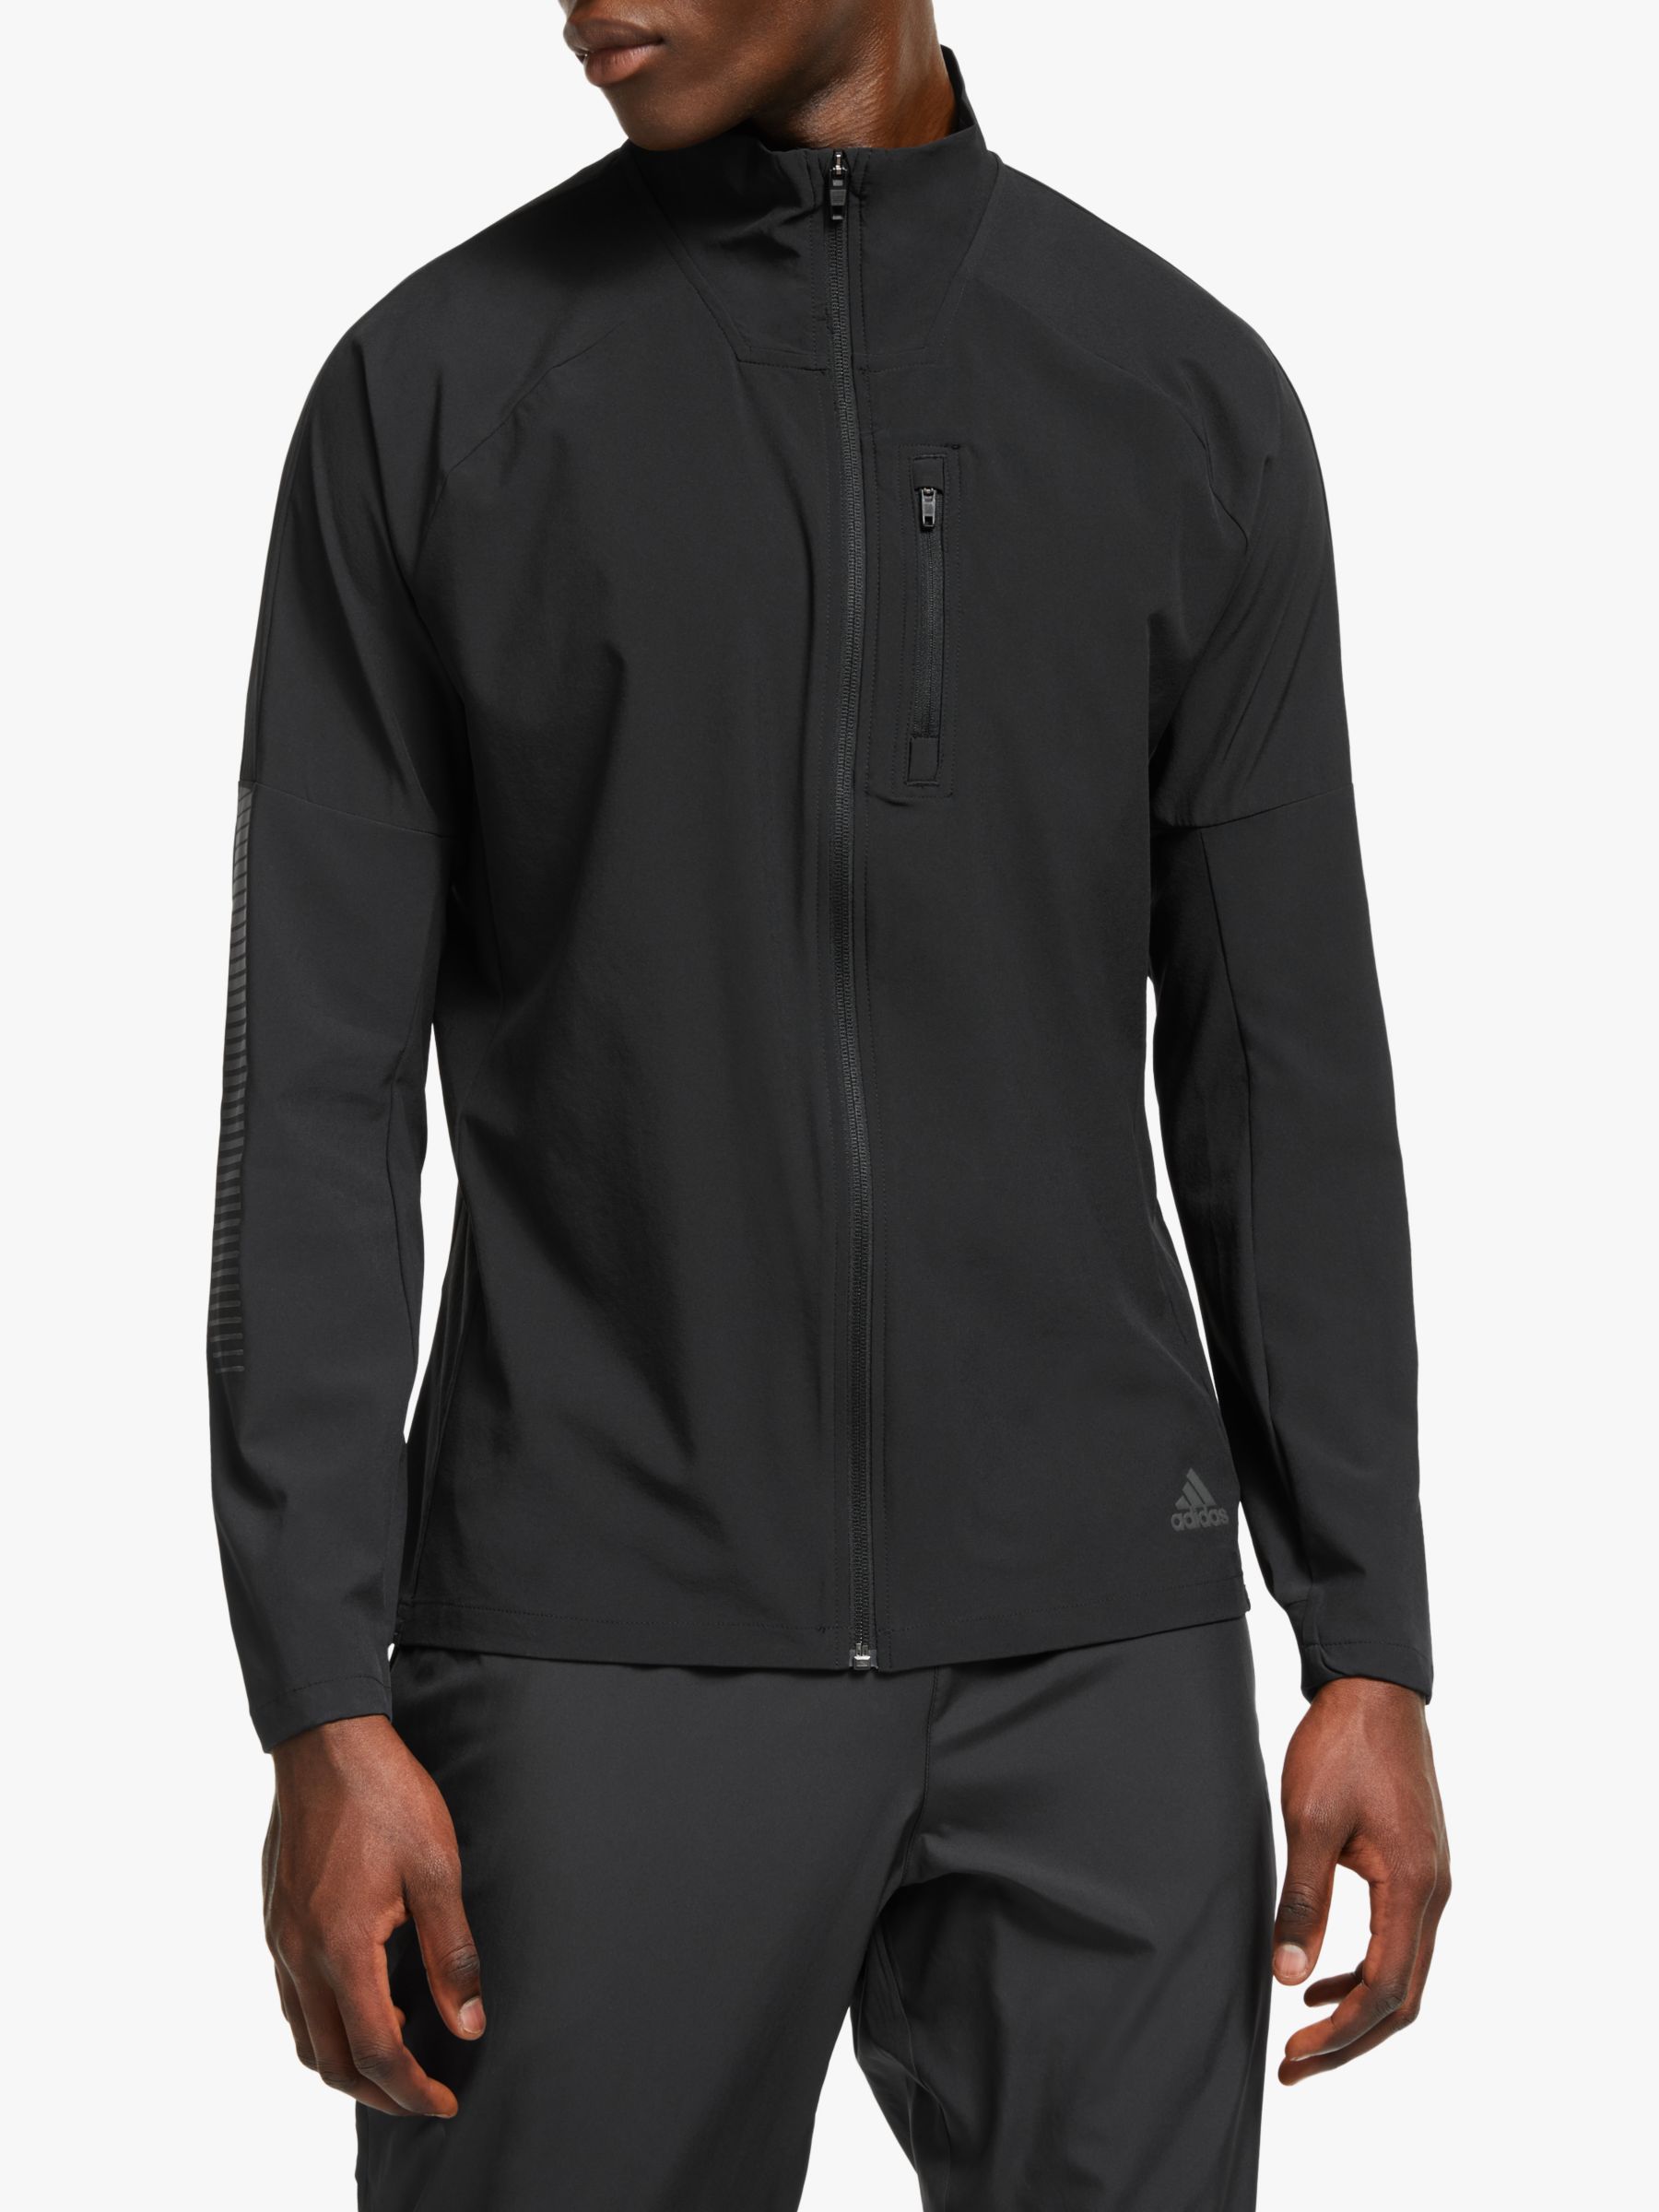 adidas rise up and run jacket review